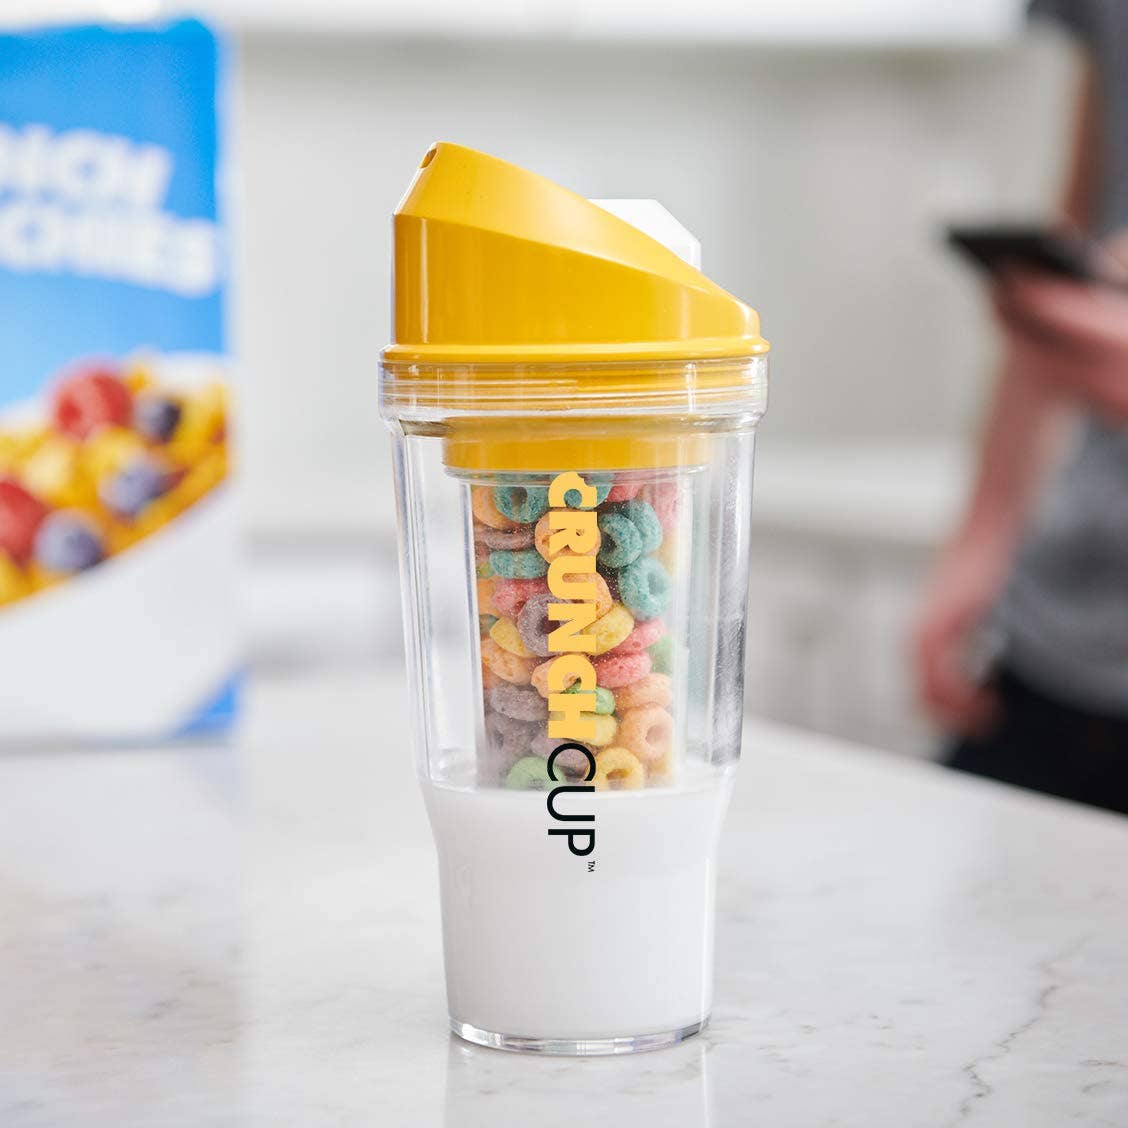 CRUNCHCUP XL BLUE - Portable Plastic Cereal Cups for Breakfast On the Go,  To Go Cereal and Milk Container for your favorite Breakfast Cereals, No  Spoon or Bowl Required: Home & Kitchen 